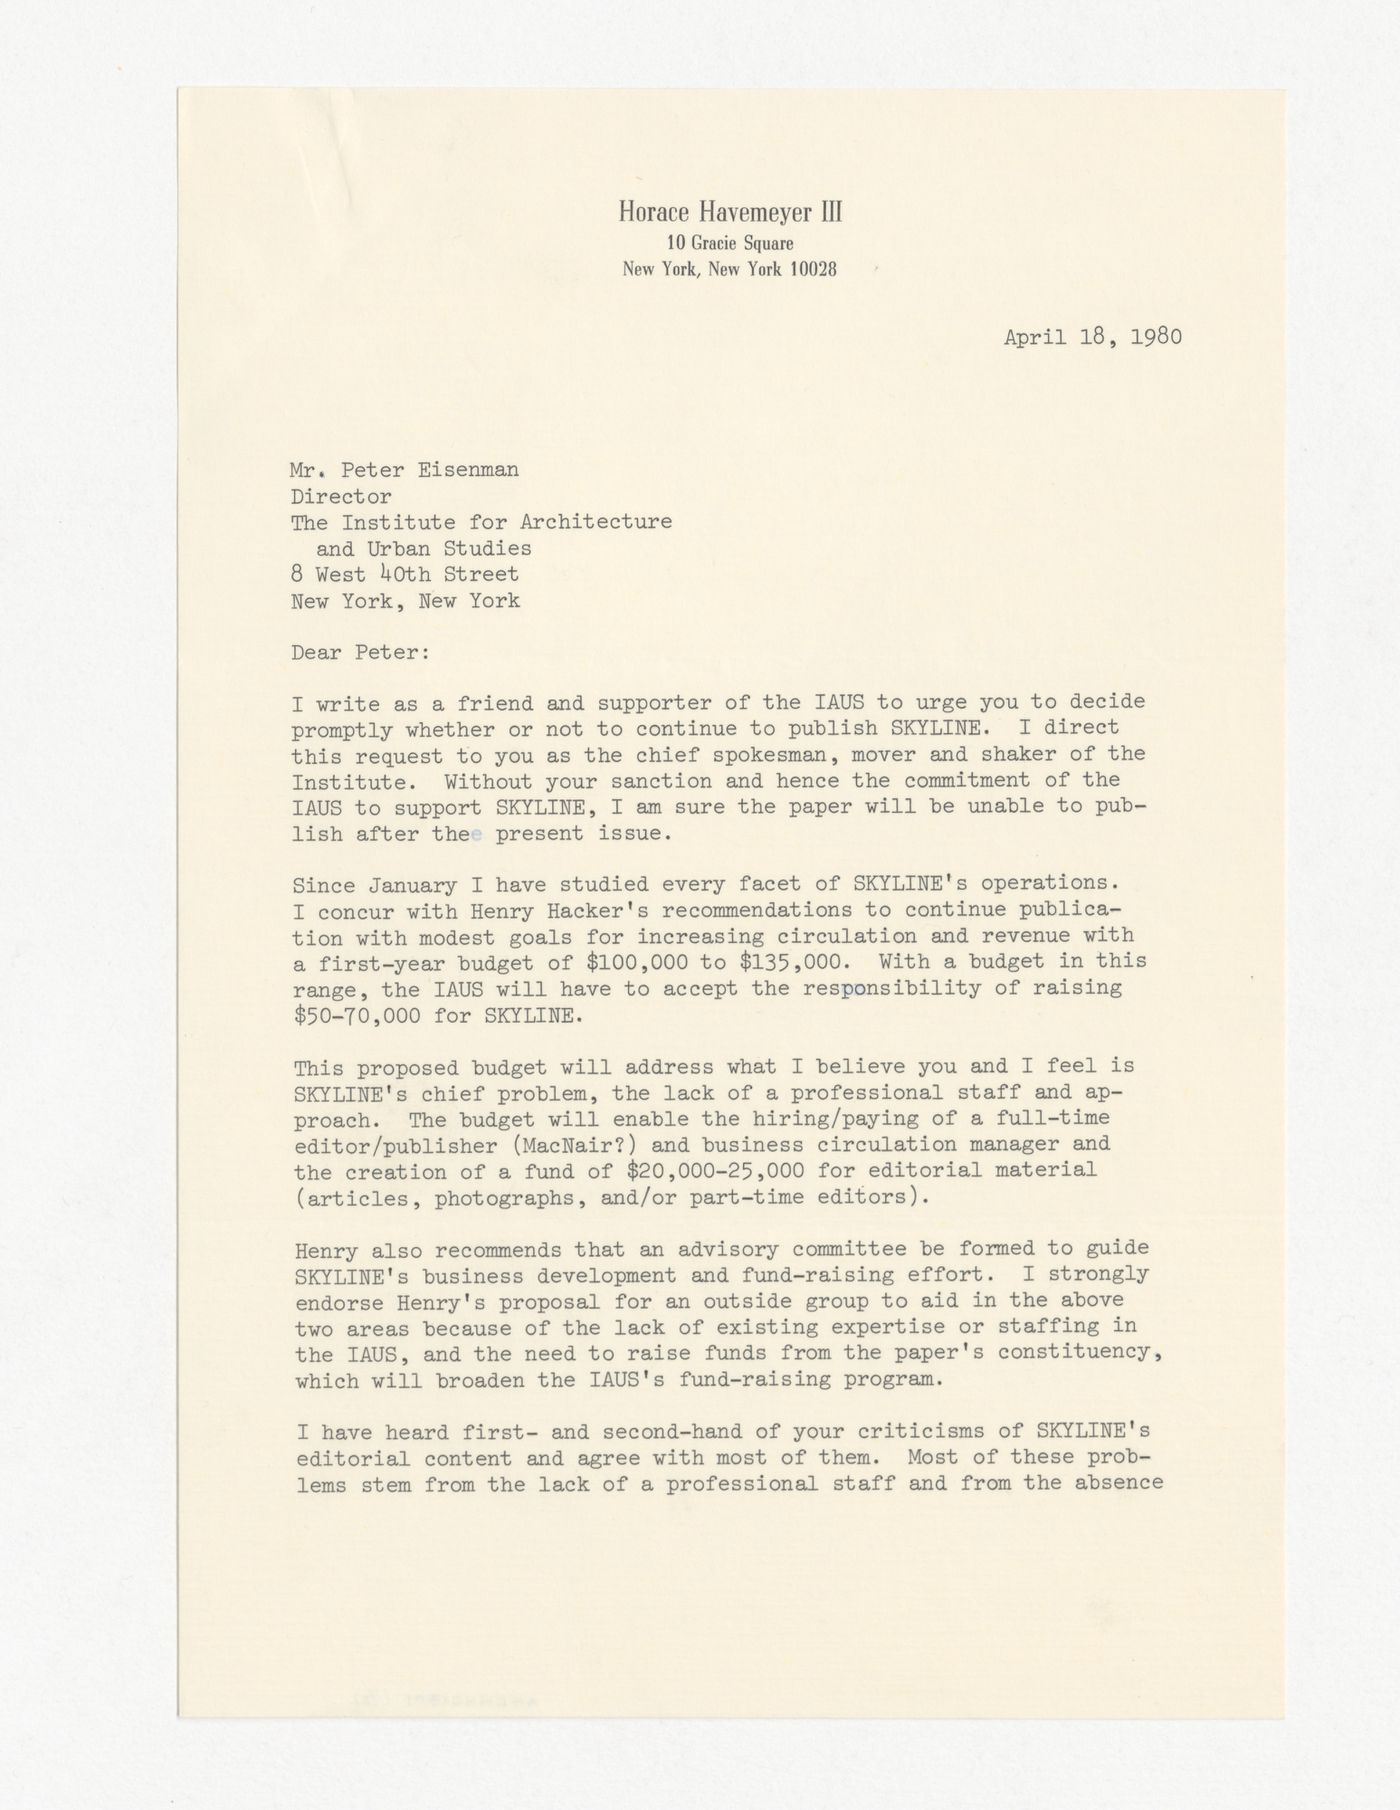 Letter from Horace Havemeyer III to Peter D. Eisenman about continuing publication of Skyline